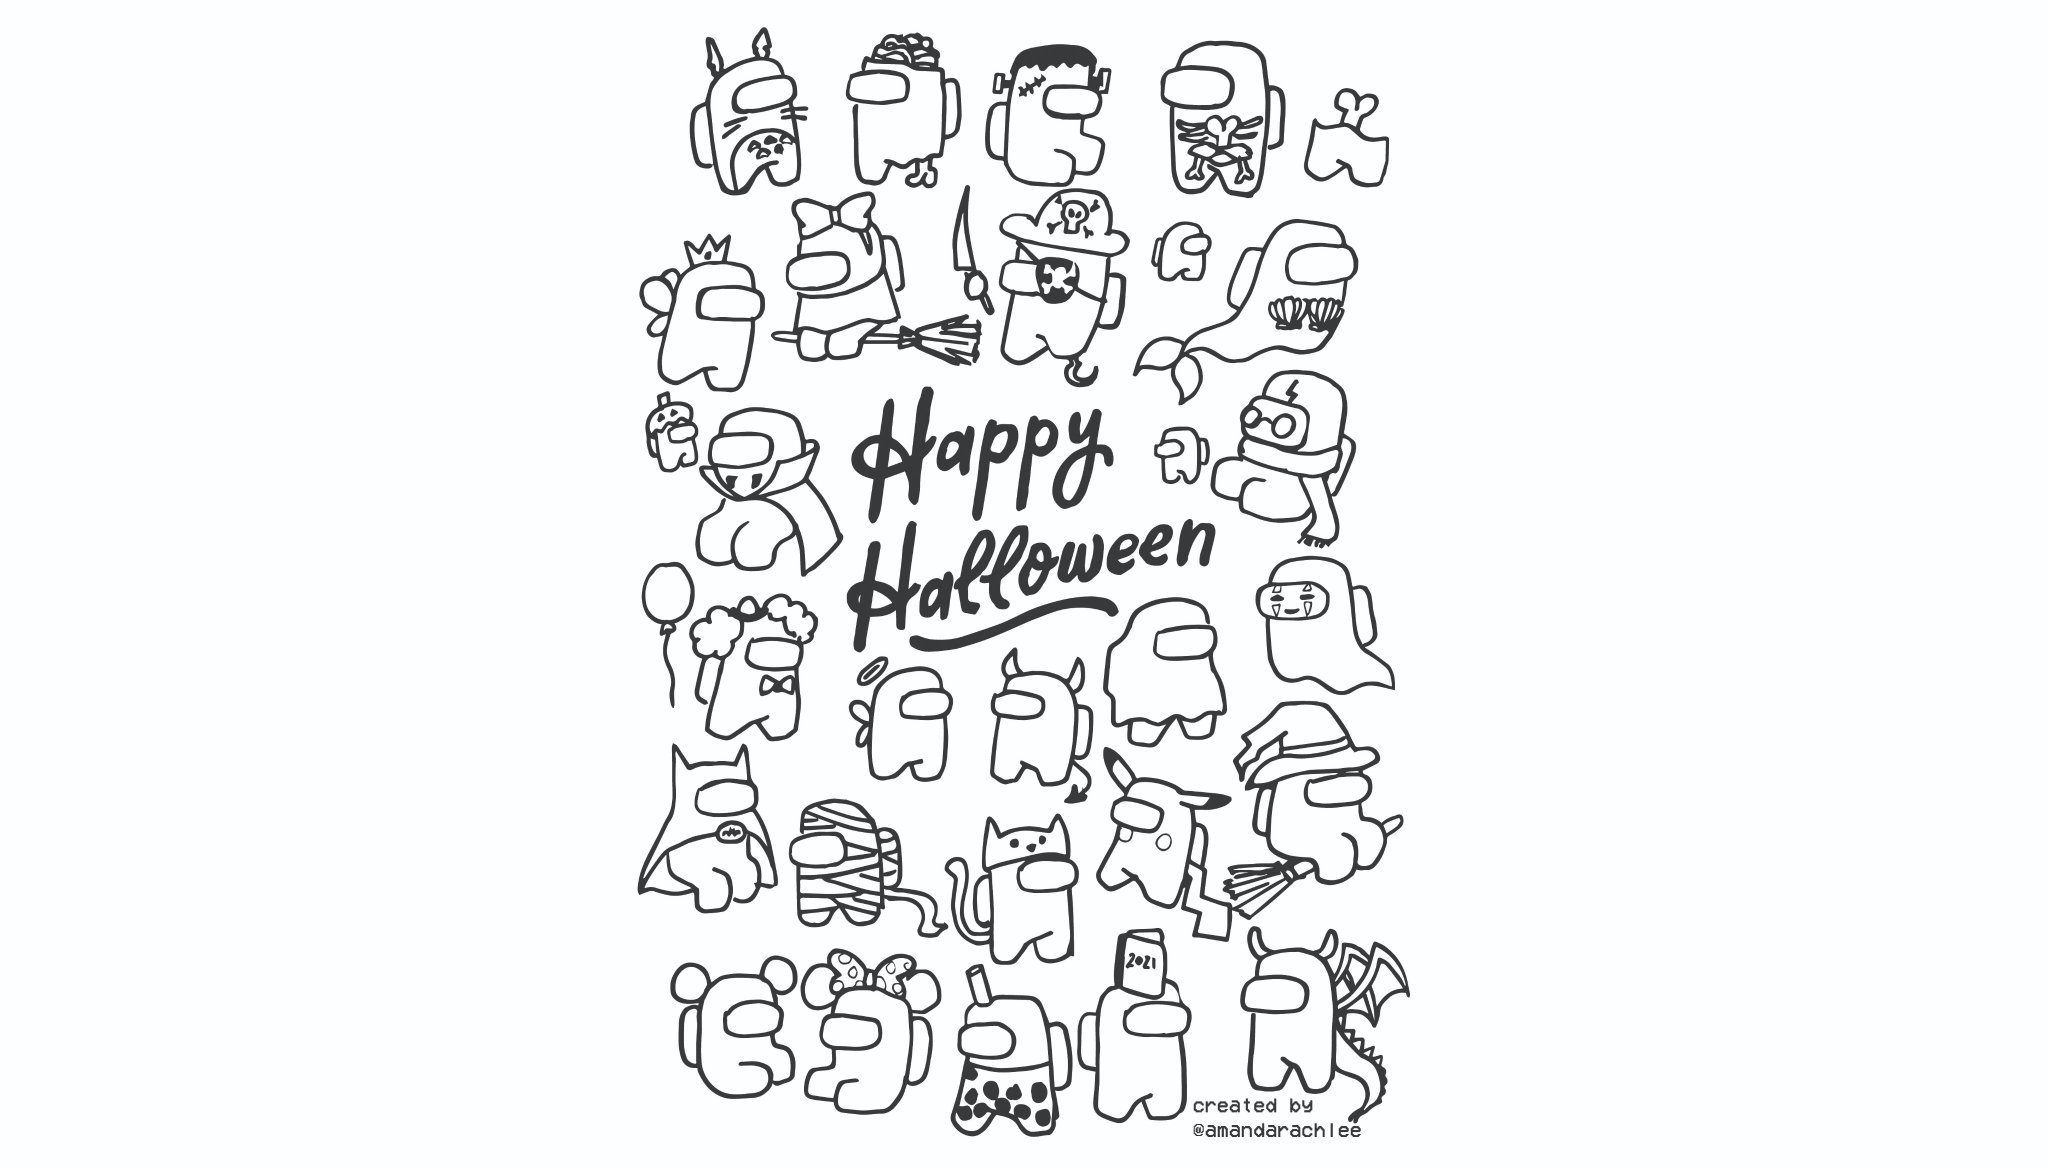 Amandarachlee Happy Halloween Among Us But Make It Halloween Costume Party As A Little Halloween Present To You I Made It Into A Colouring Sheet For You Guys